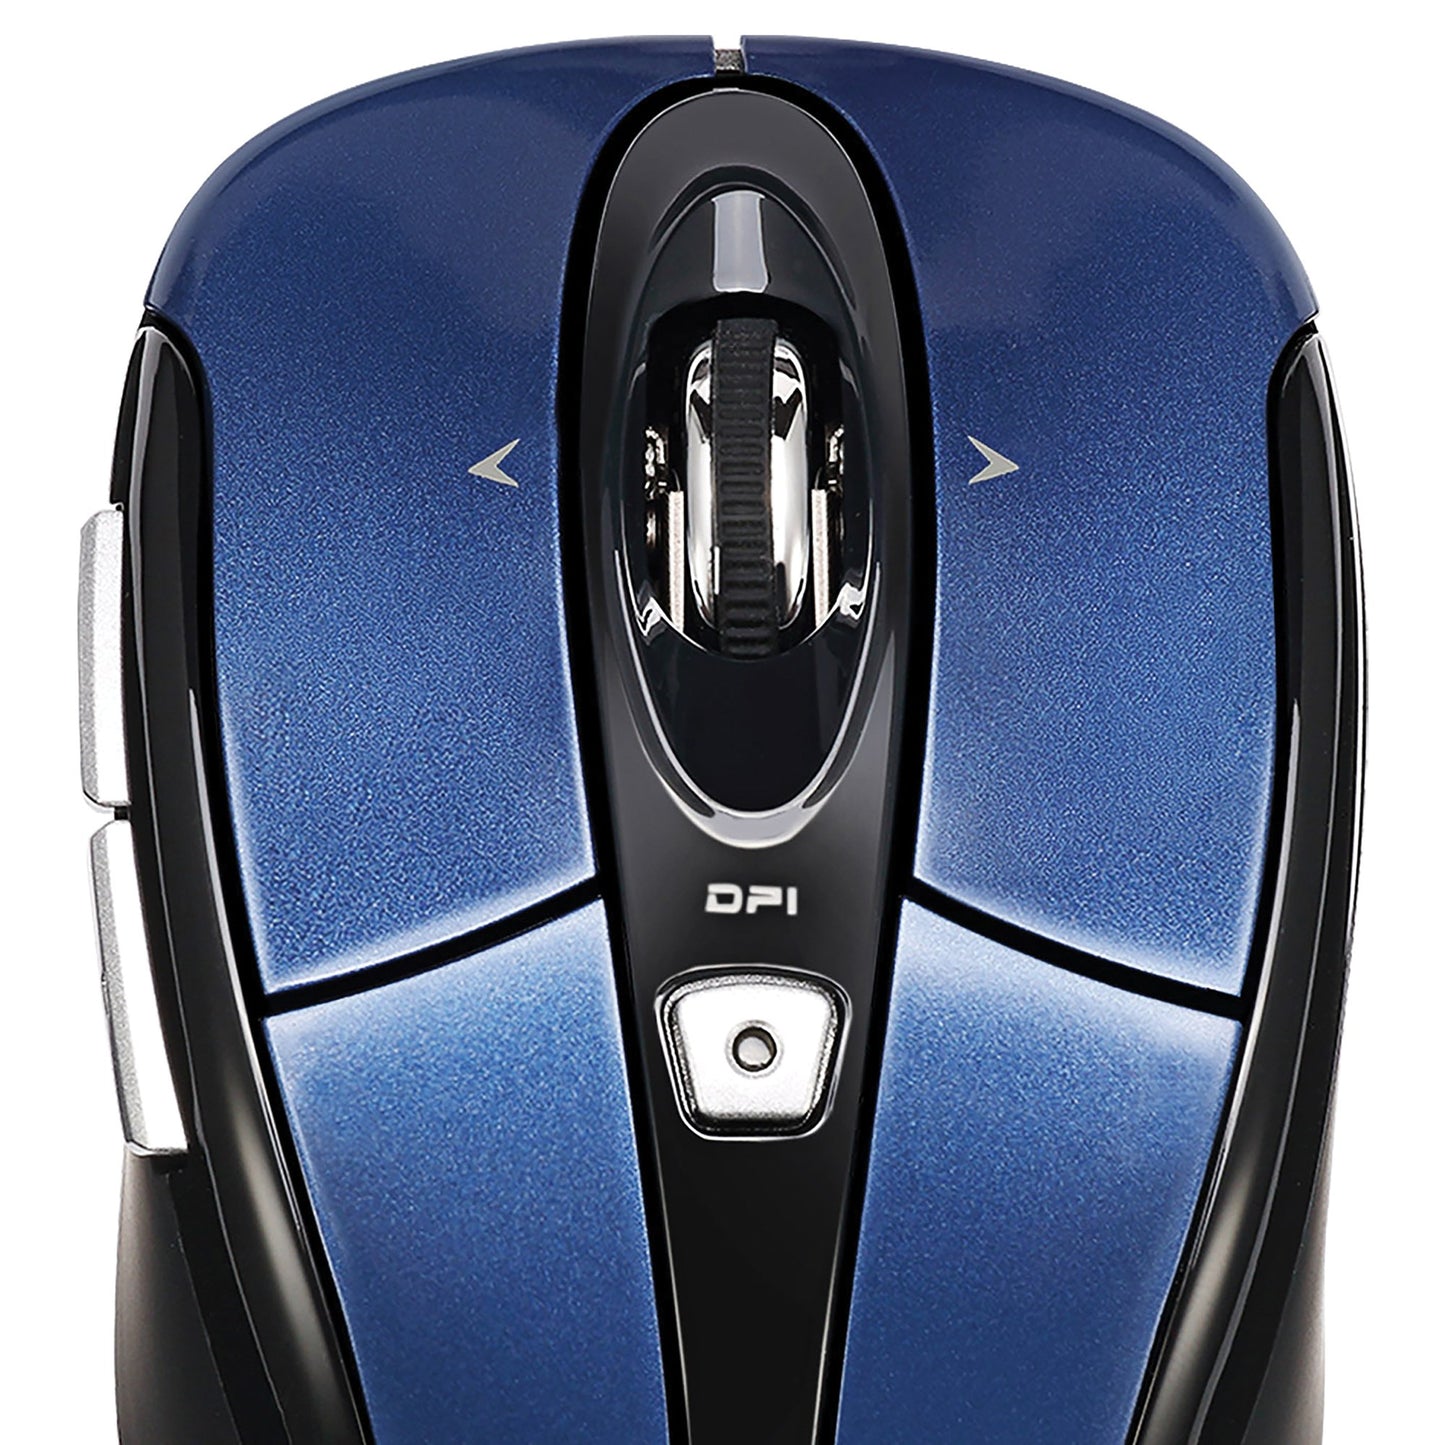 Adesso IMOUSE S60L iMouse S60 2.4 GHz Wireless Programmable Nano Mouse (Blue)